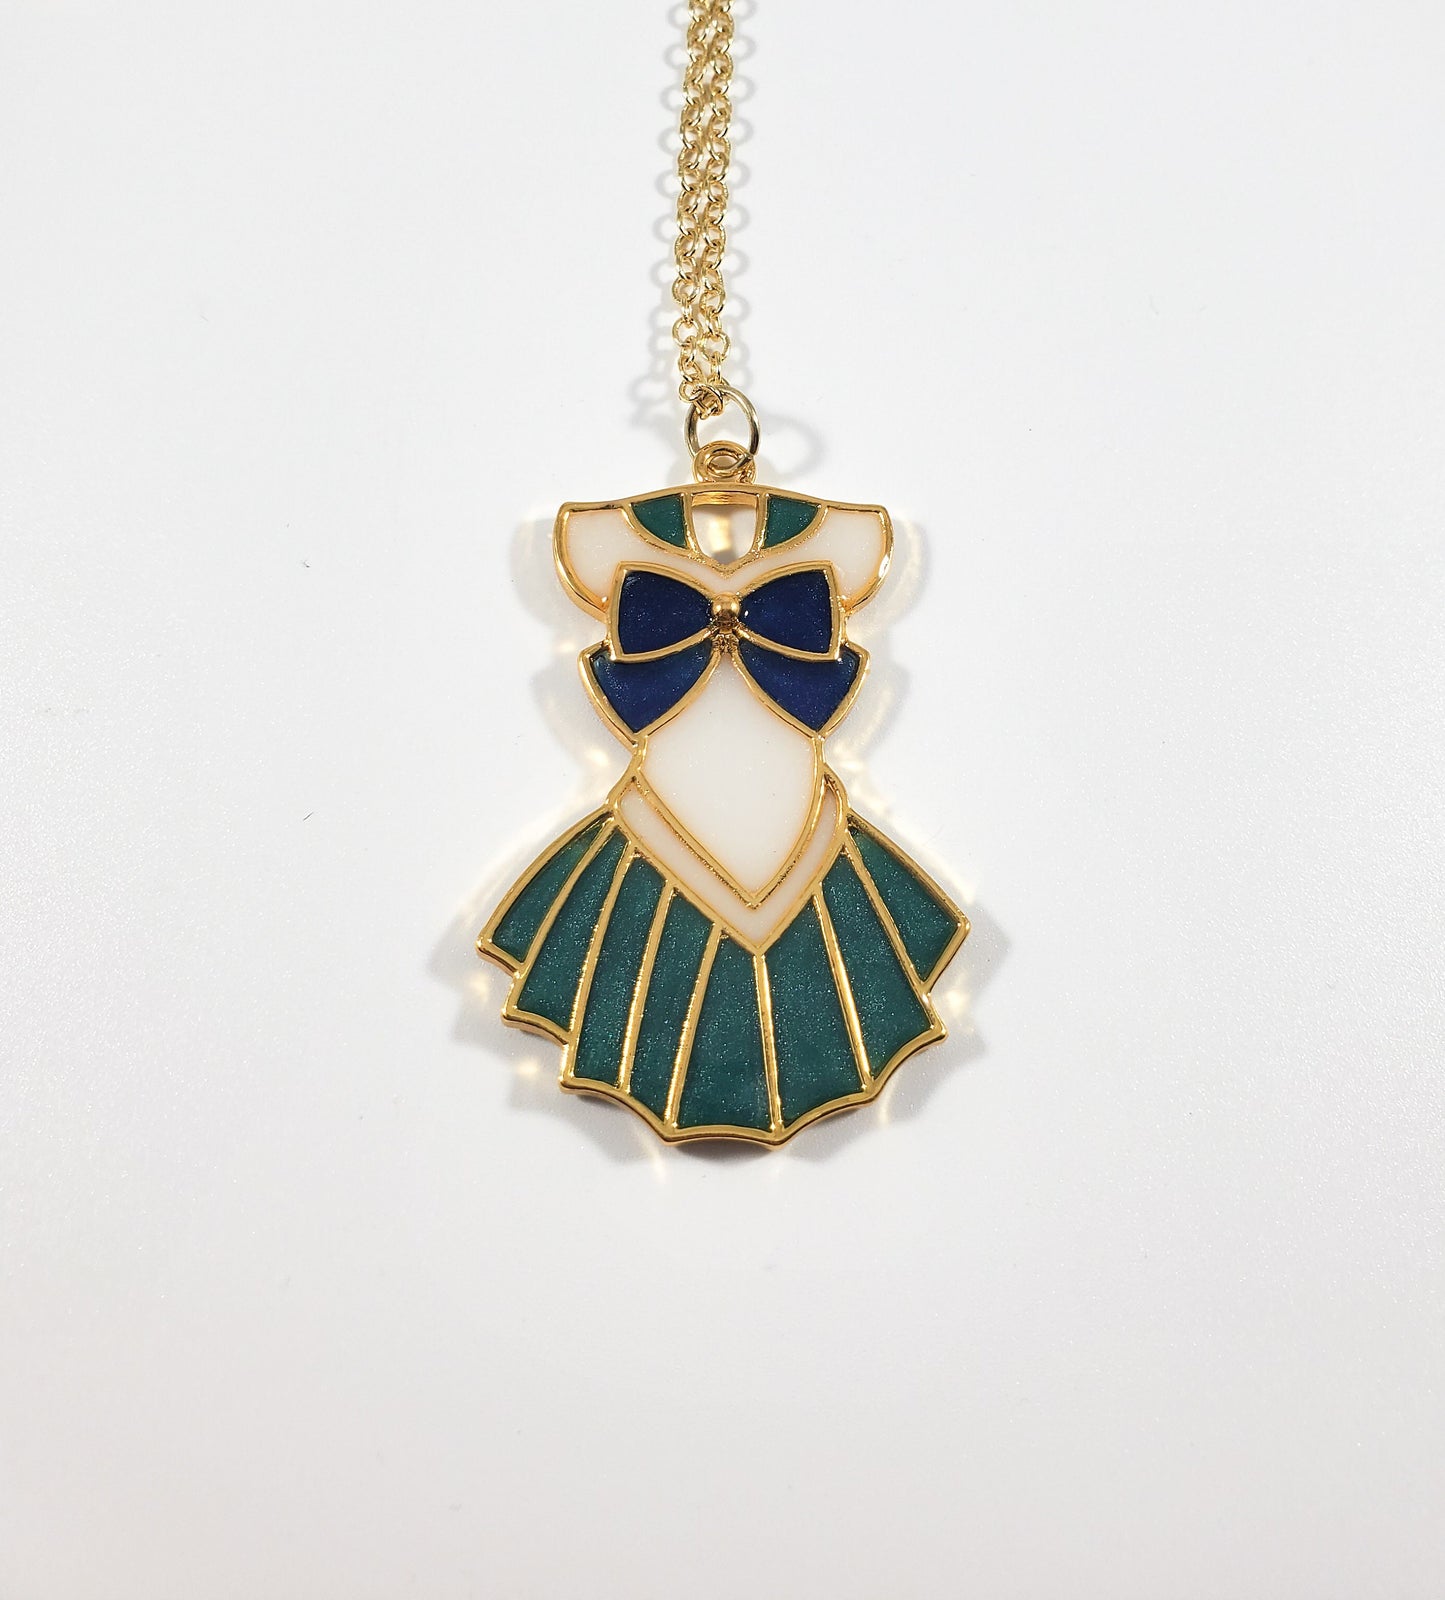 Sailor Neptune charm necklace or keychain